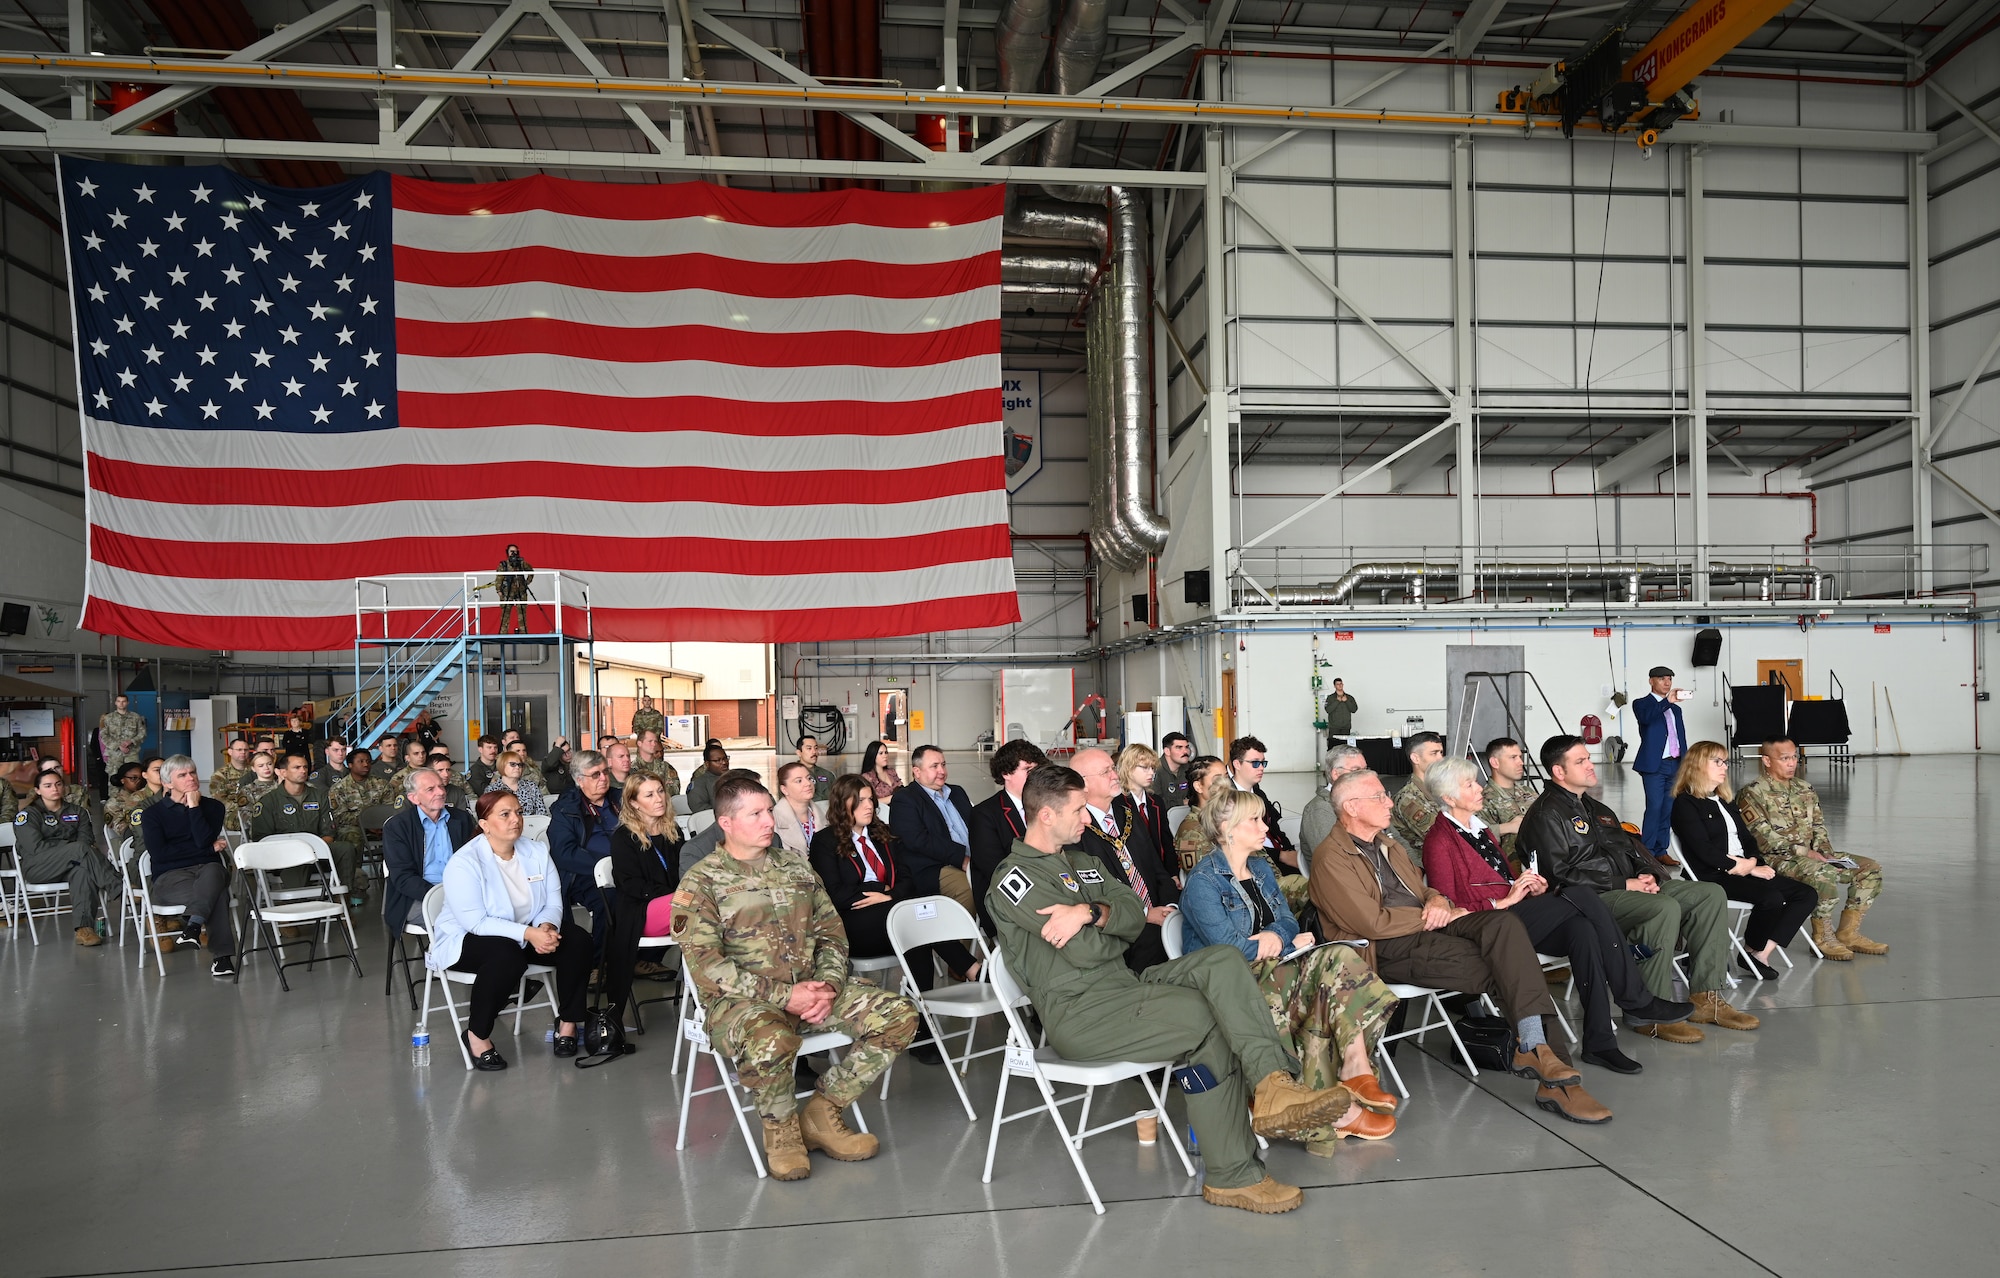 Audience members listen to a speech by Chris Barrett, husband of Laura Barrett, grand-niece of Lt. Harry Edeburn, co-pilot on the 100th Bomb Group’s original “Squawkin Hawk” B-17 Flying Fortress during World War II, at a nose art dedication ceremony at Royal Air Force Mildenhall, England, Oct. 10, 2023. The 100th Air Refueling Wing unveiled two new heritage nose art on their KC-135 Stratotanker fleet, one of which was “Squawkin Hawk.” (U.S. Air Force photo by Karen Abeyasekere)